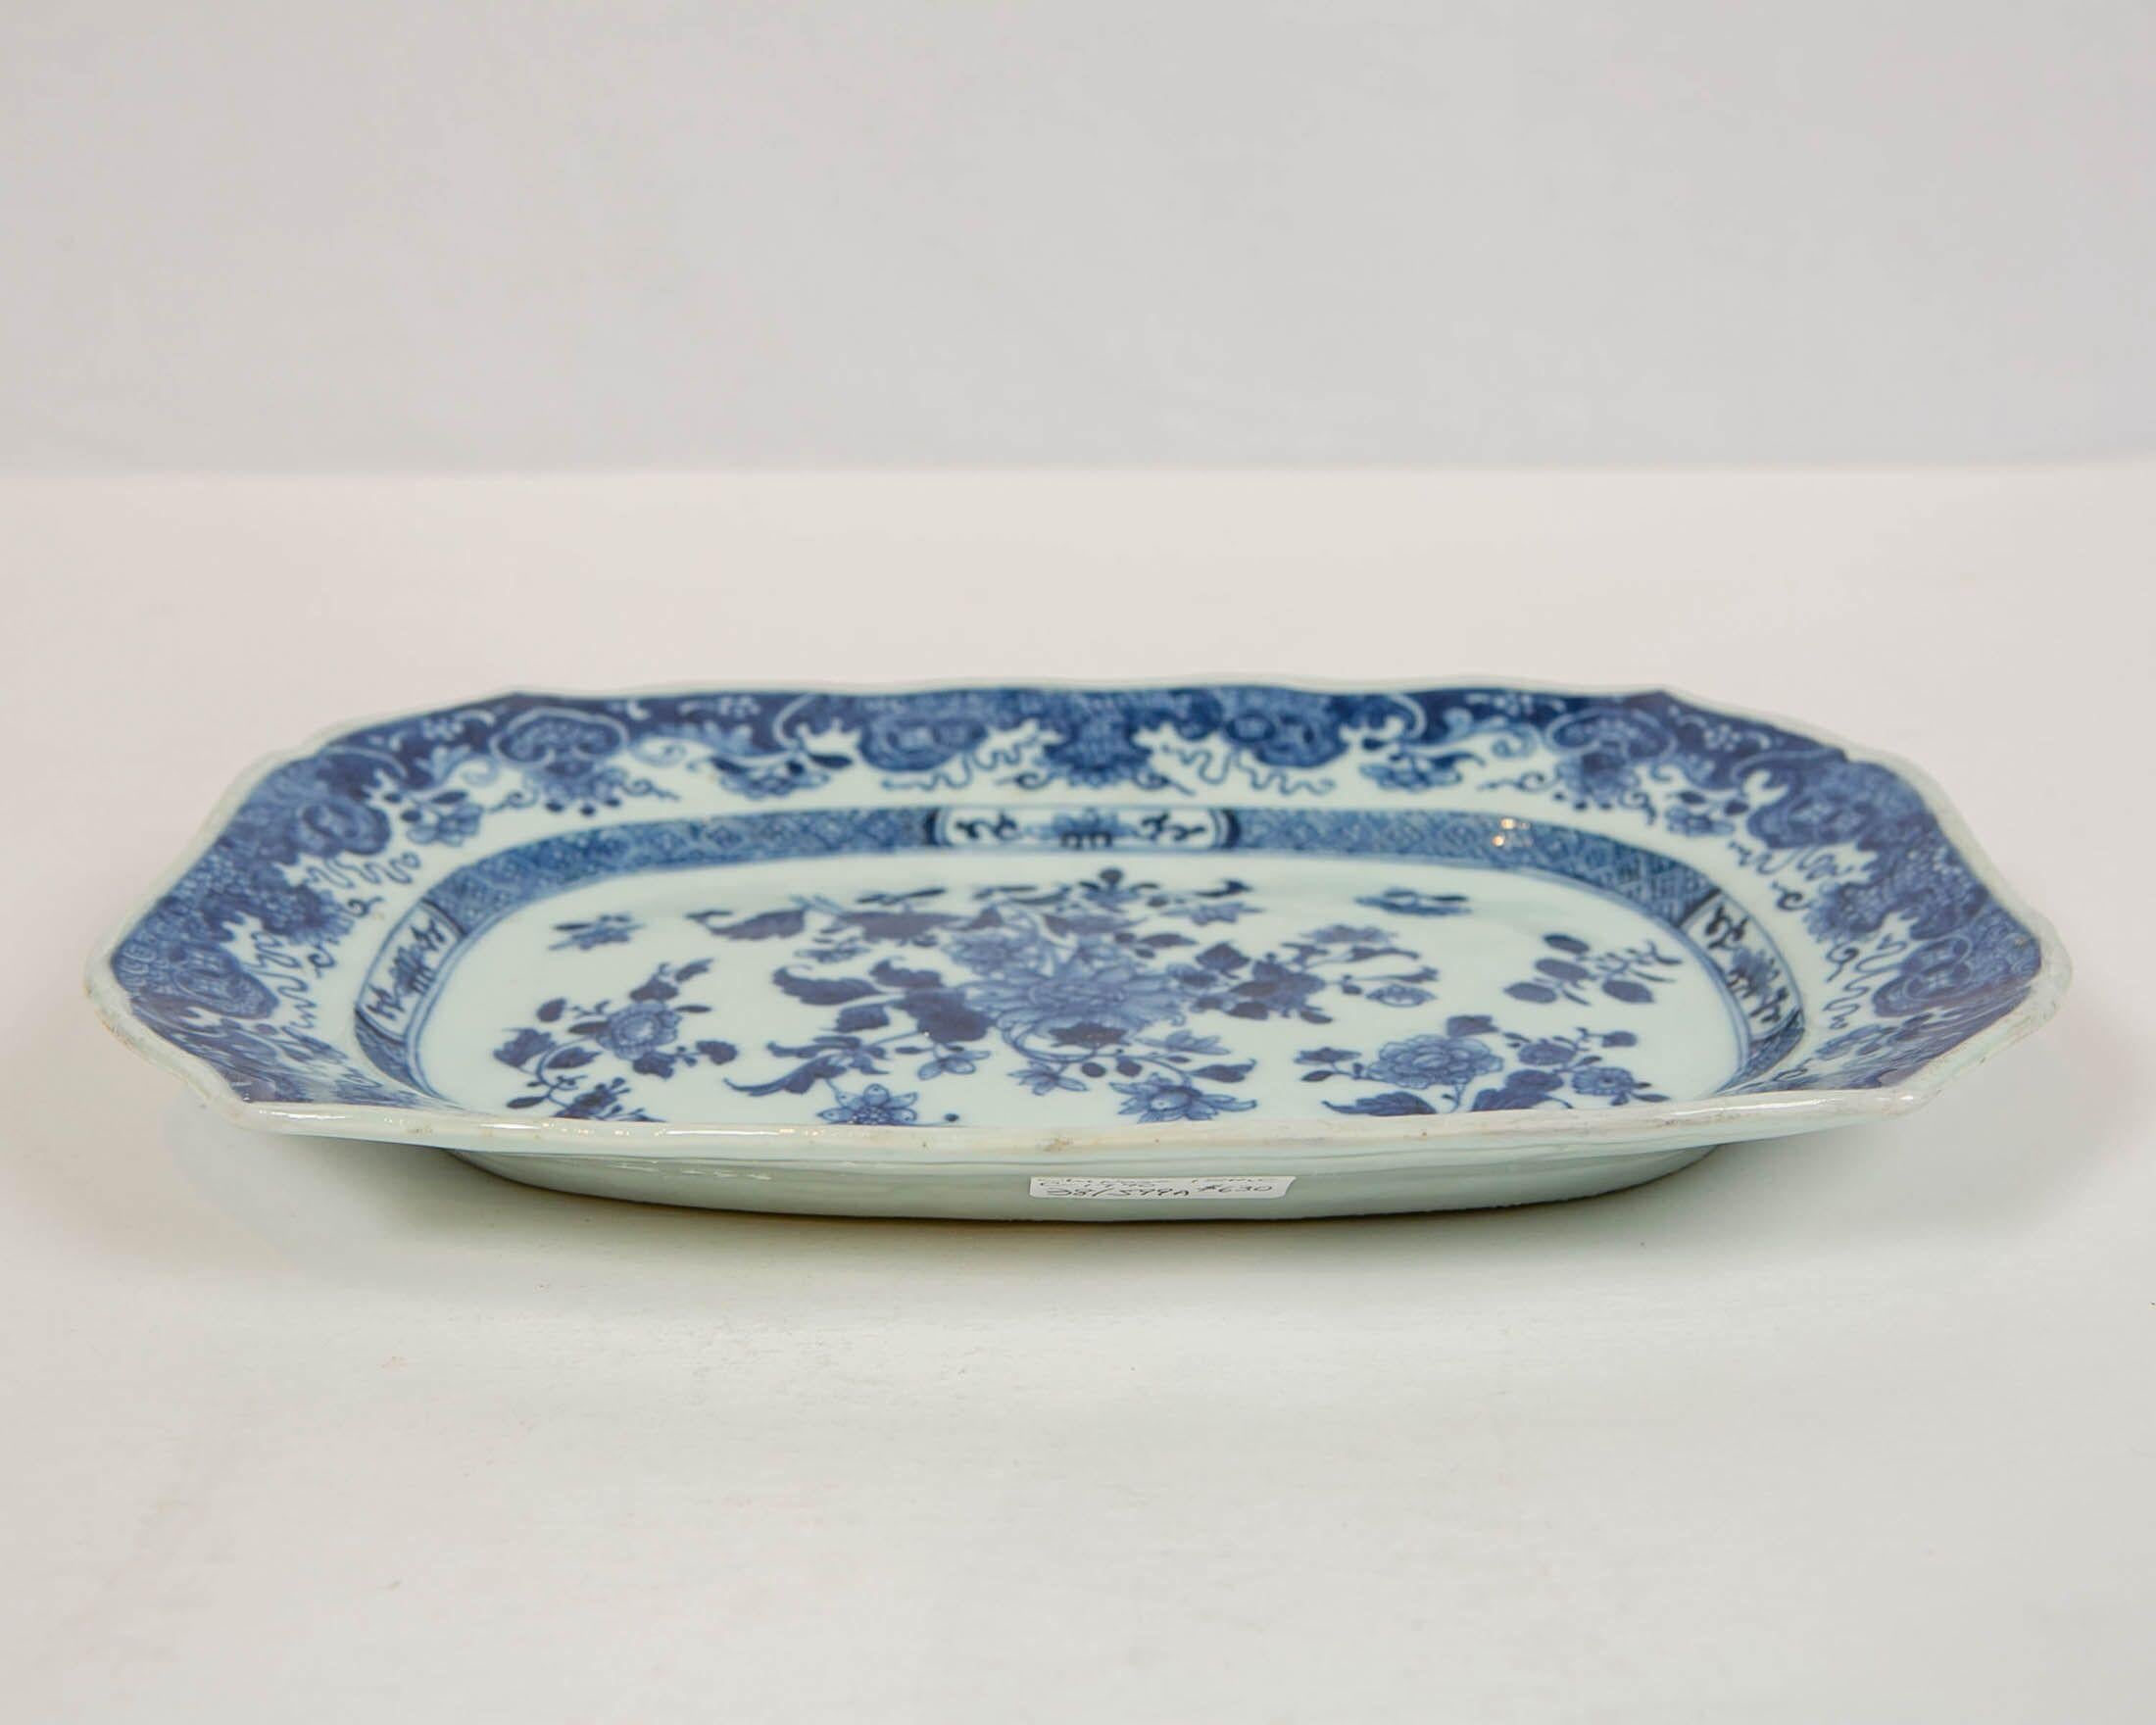 Late 18th Century Chinese Blue and White Small Platter Made circa 1770 during the Qianlong Period